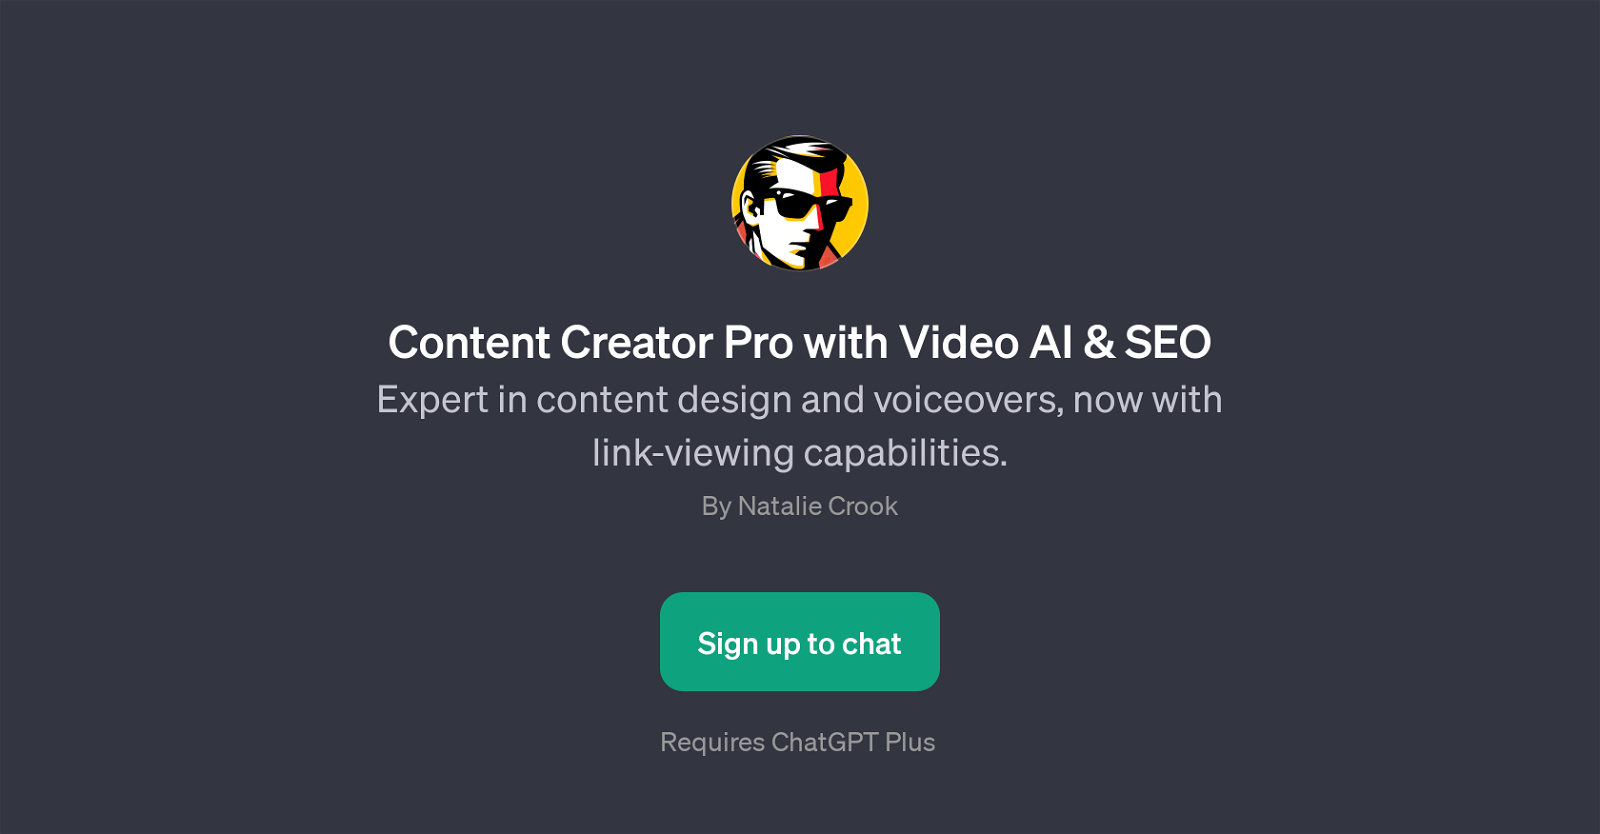 Content Creator Pro with Video AI & SEO website